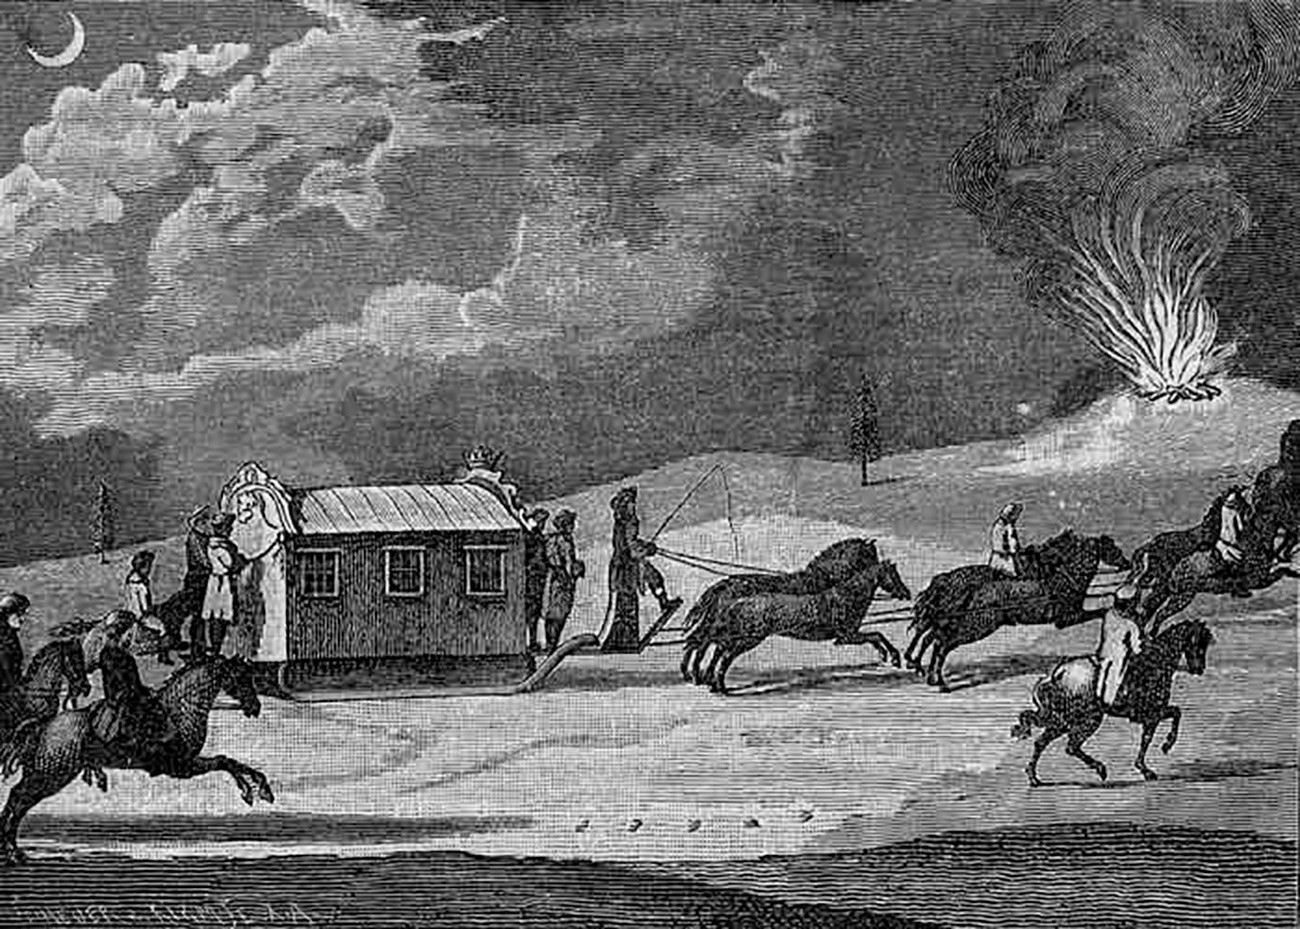 Catherine's imperial carriage during her Crimea journey in 1787